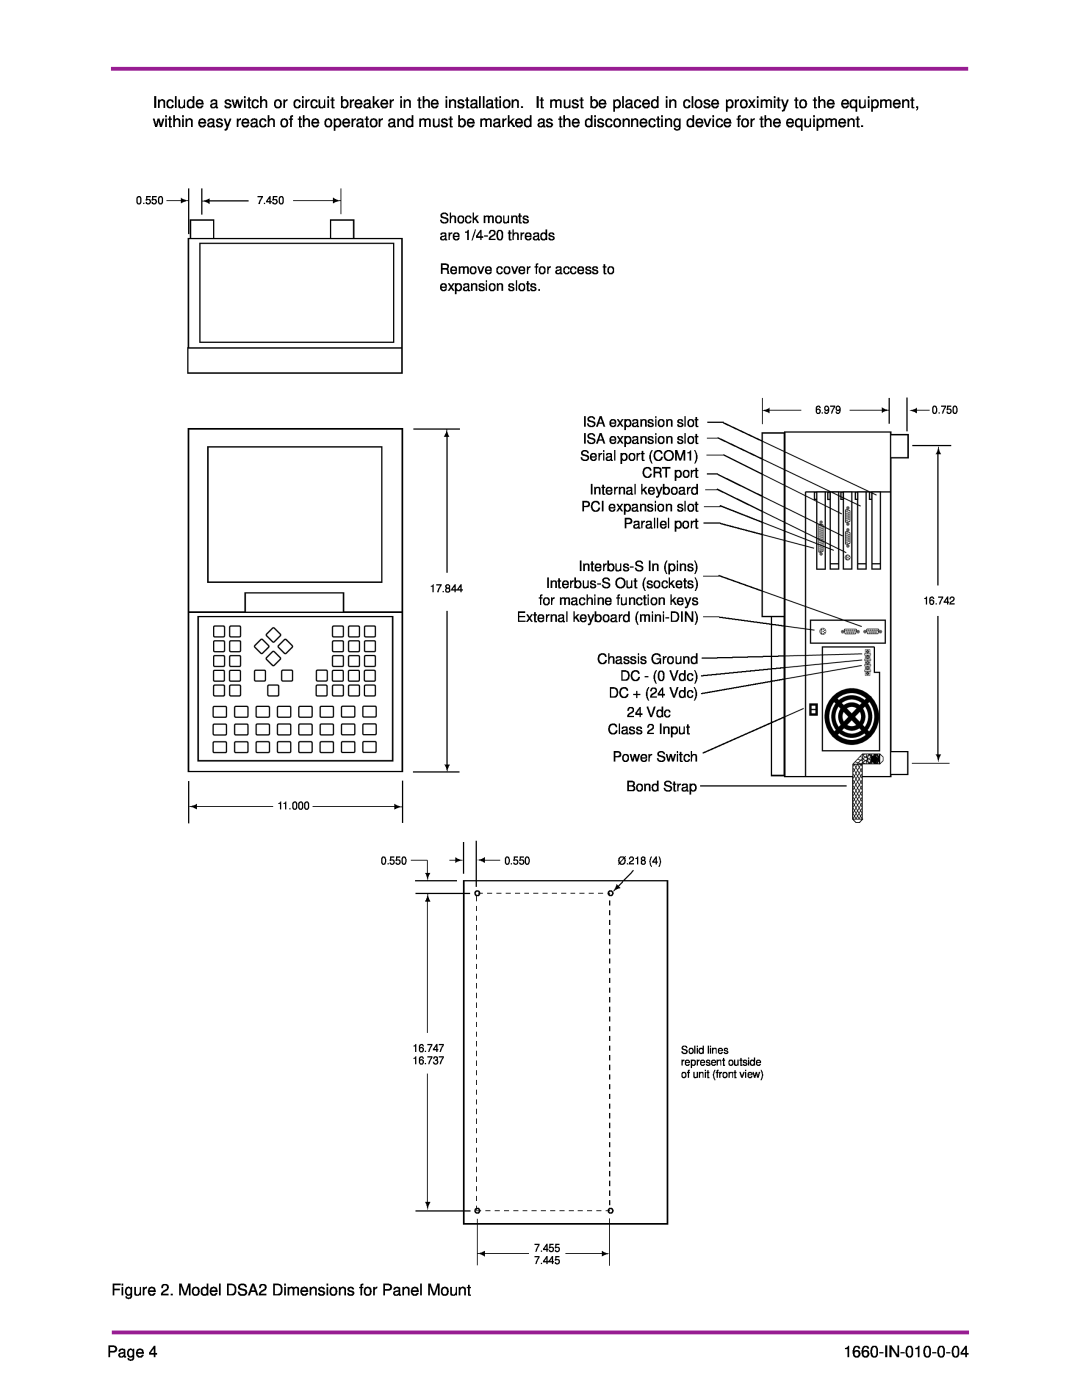 Optima Company PC specifications Model DSA2 Dimensions for Panel Mount 